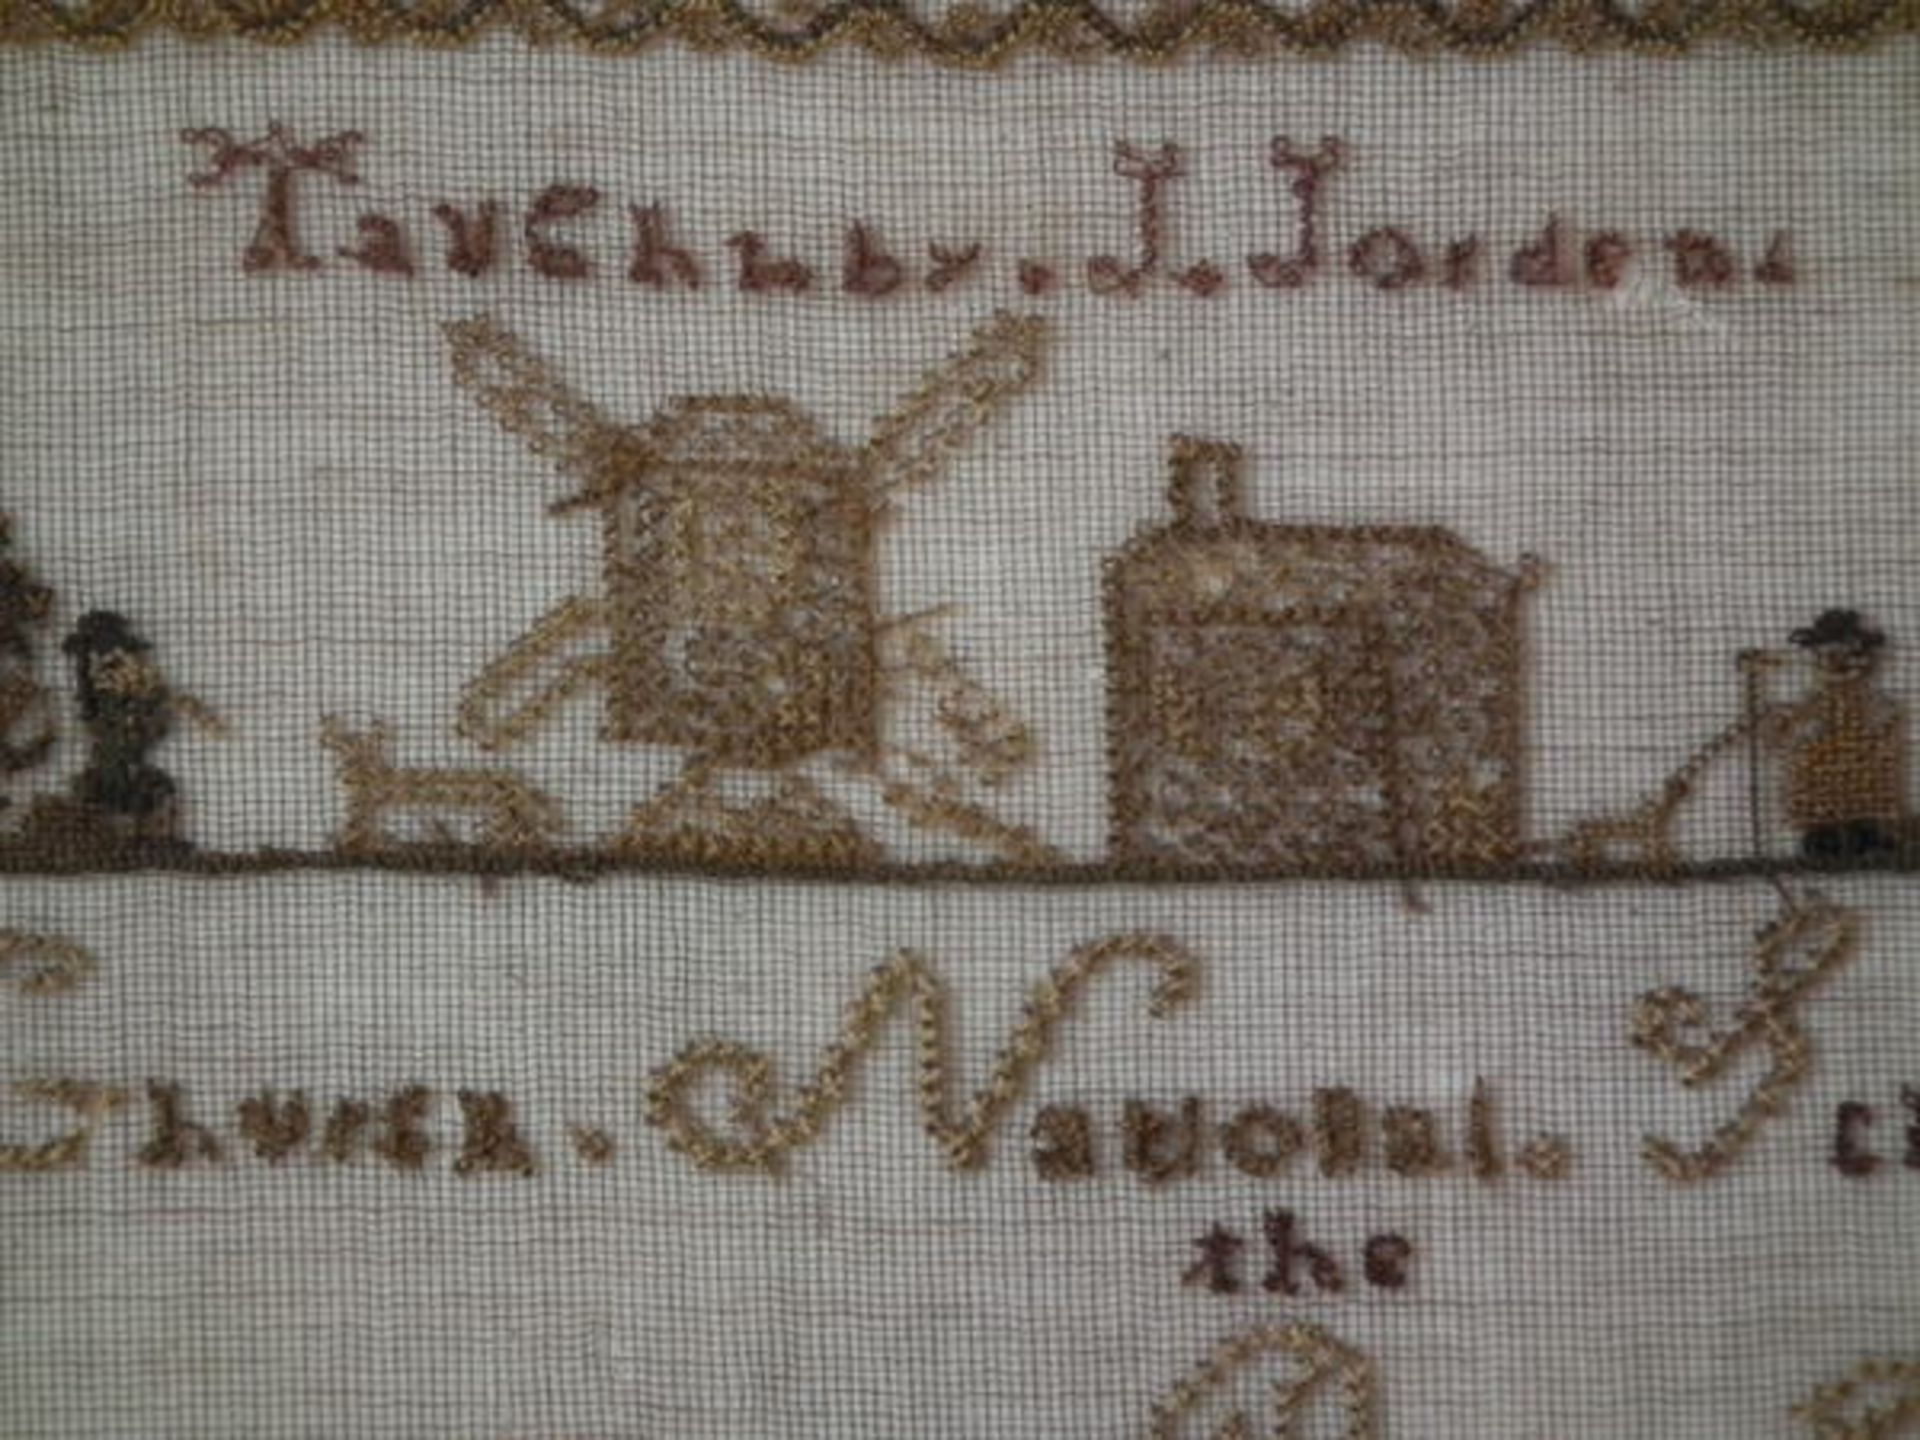 Needlework School Sampler dated 1843 by Sarah Bryan FREE UK DELIVERY - Image 10 of 38